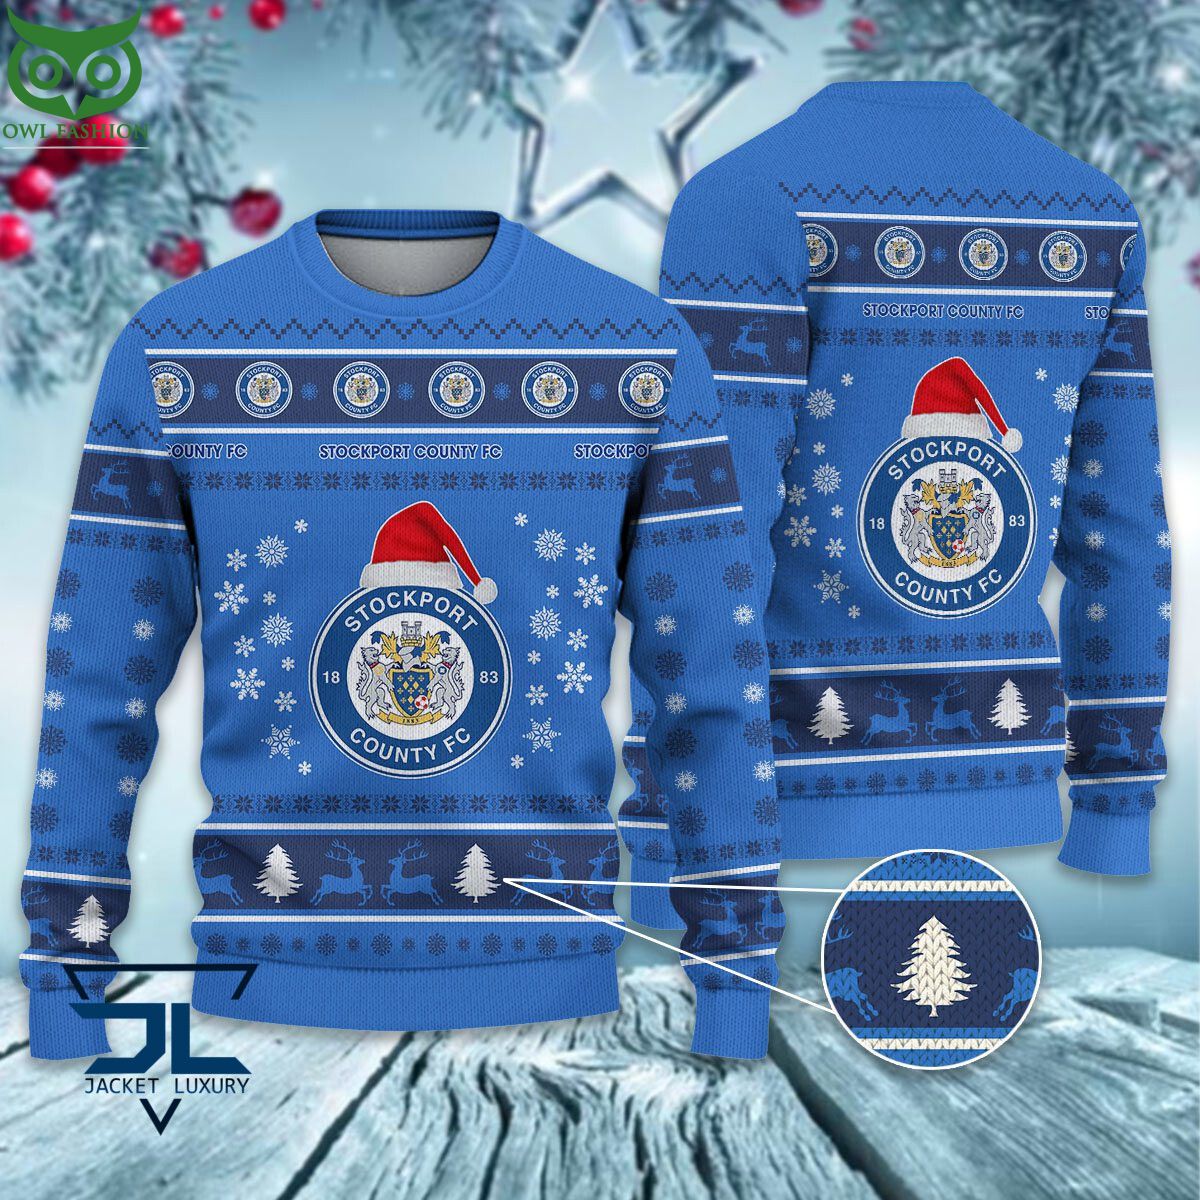 trending stockport county f c epl league cup new ugly sweater 1 oq1Gm.jpg